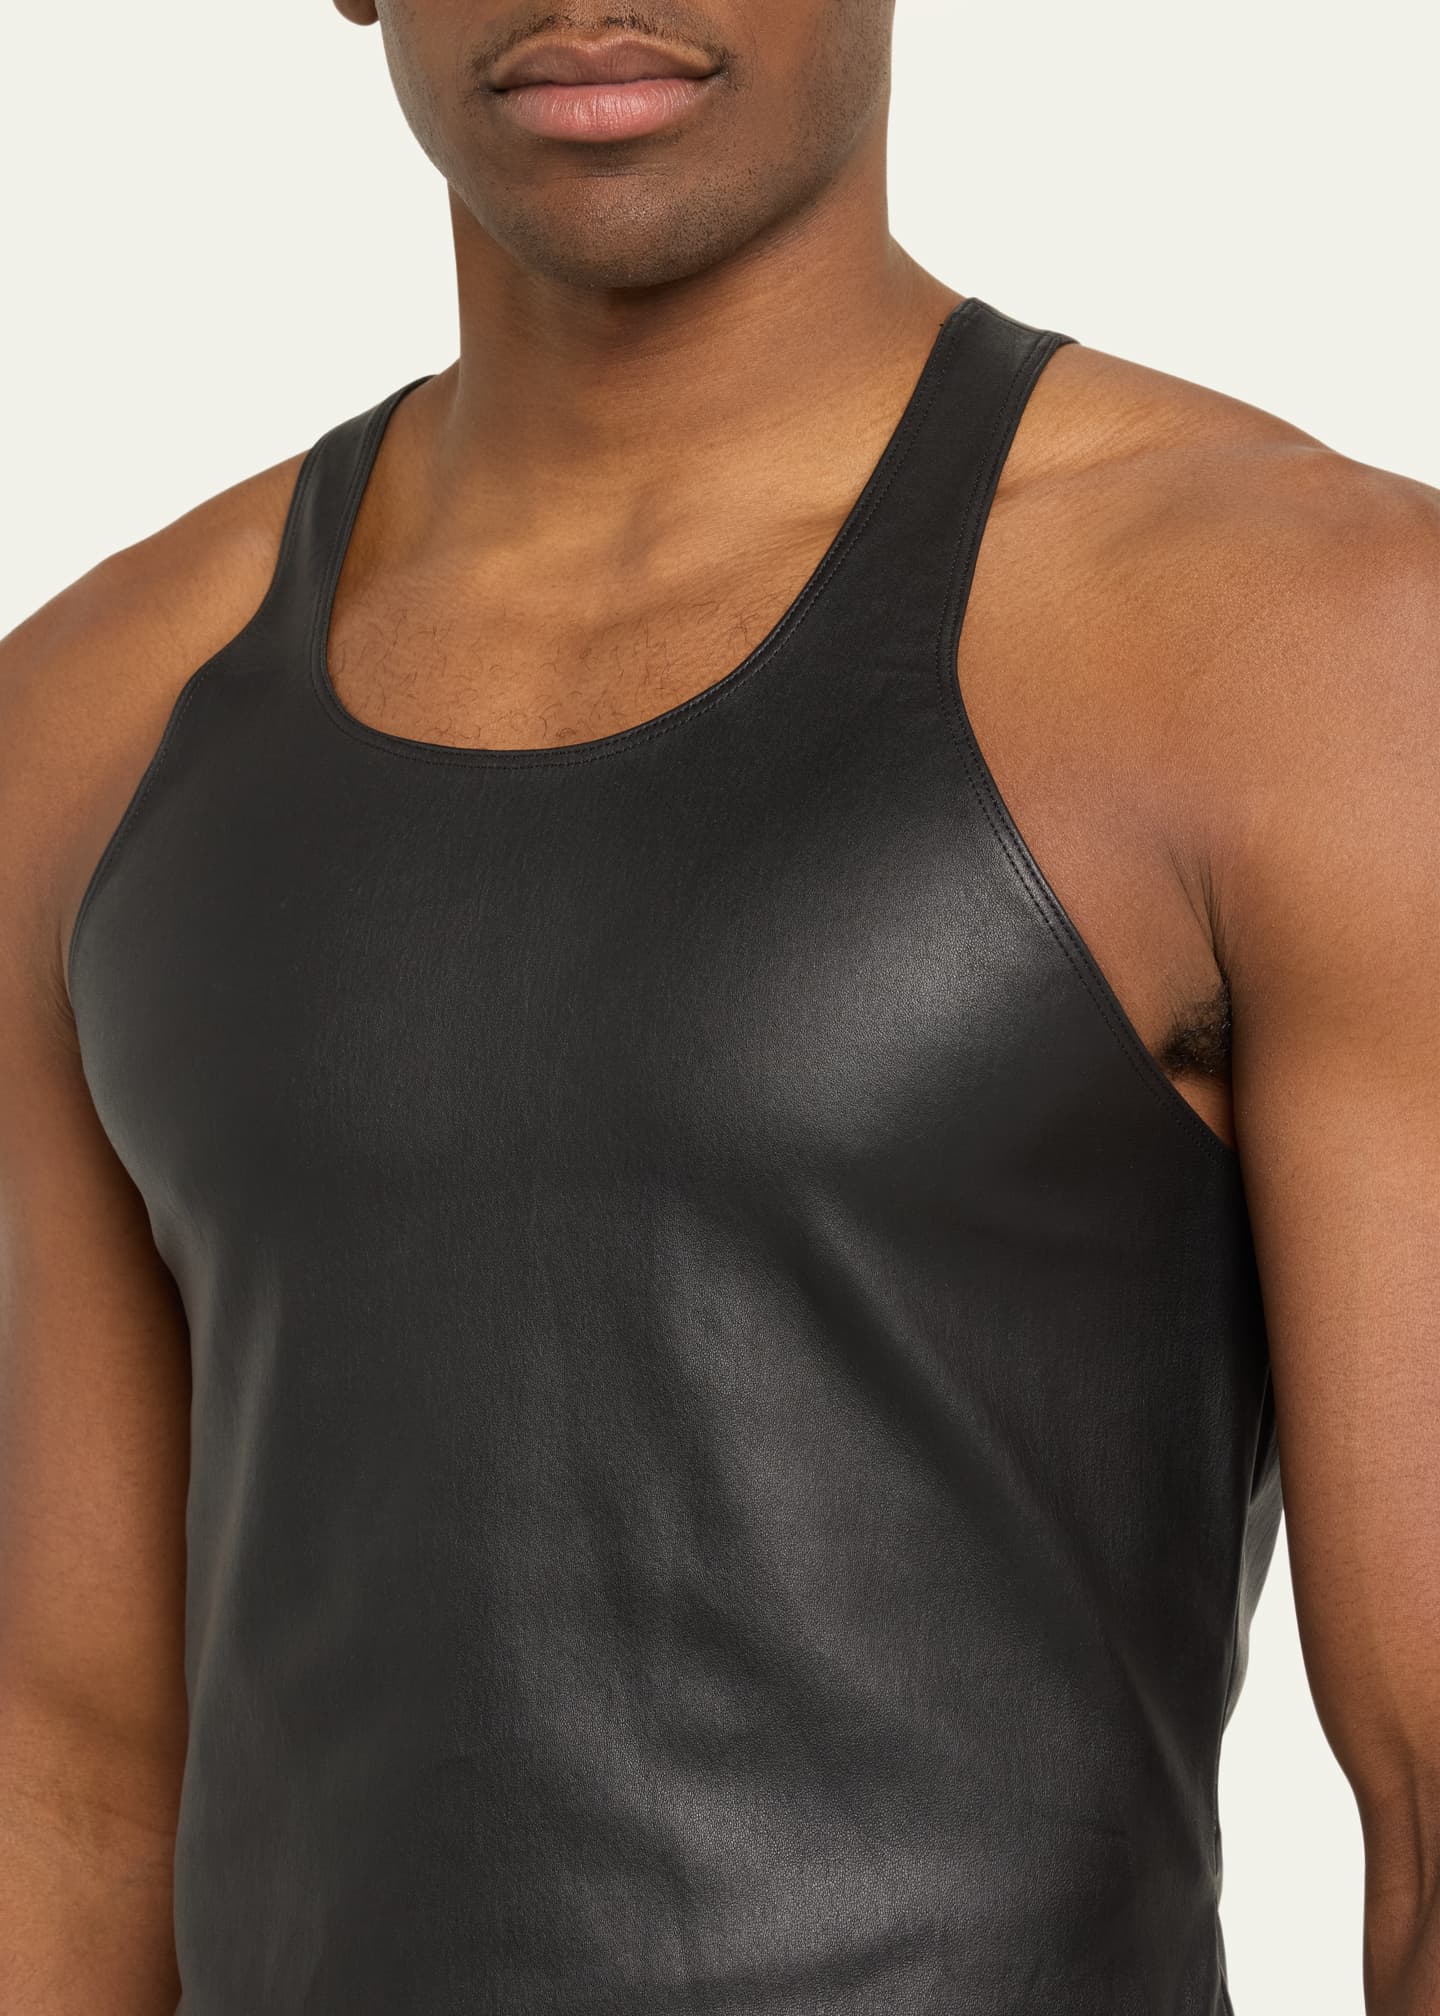 Men's Stretch Muscle Tank Top